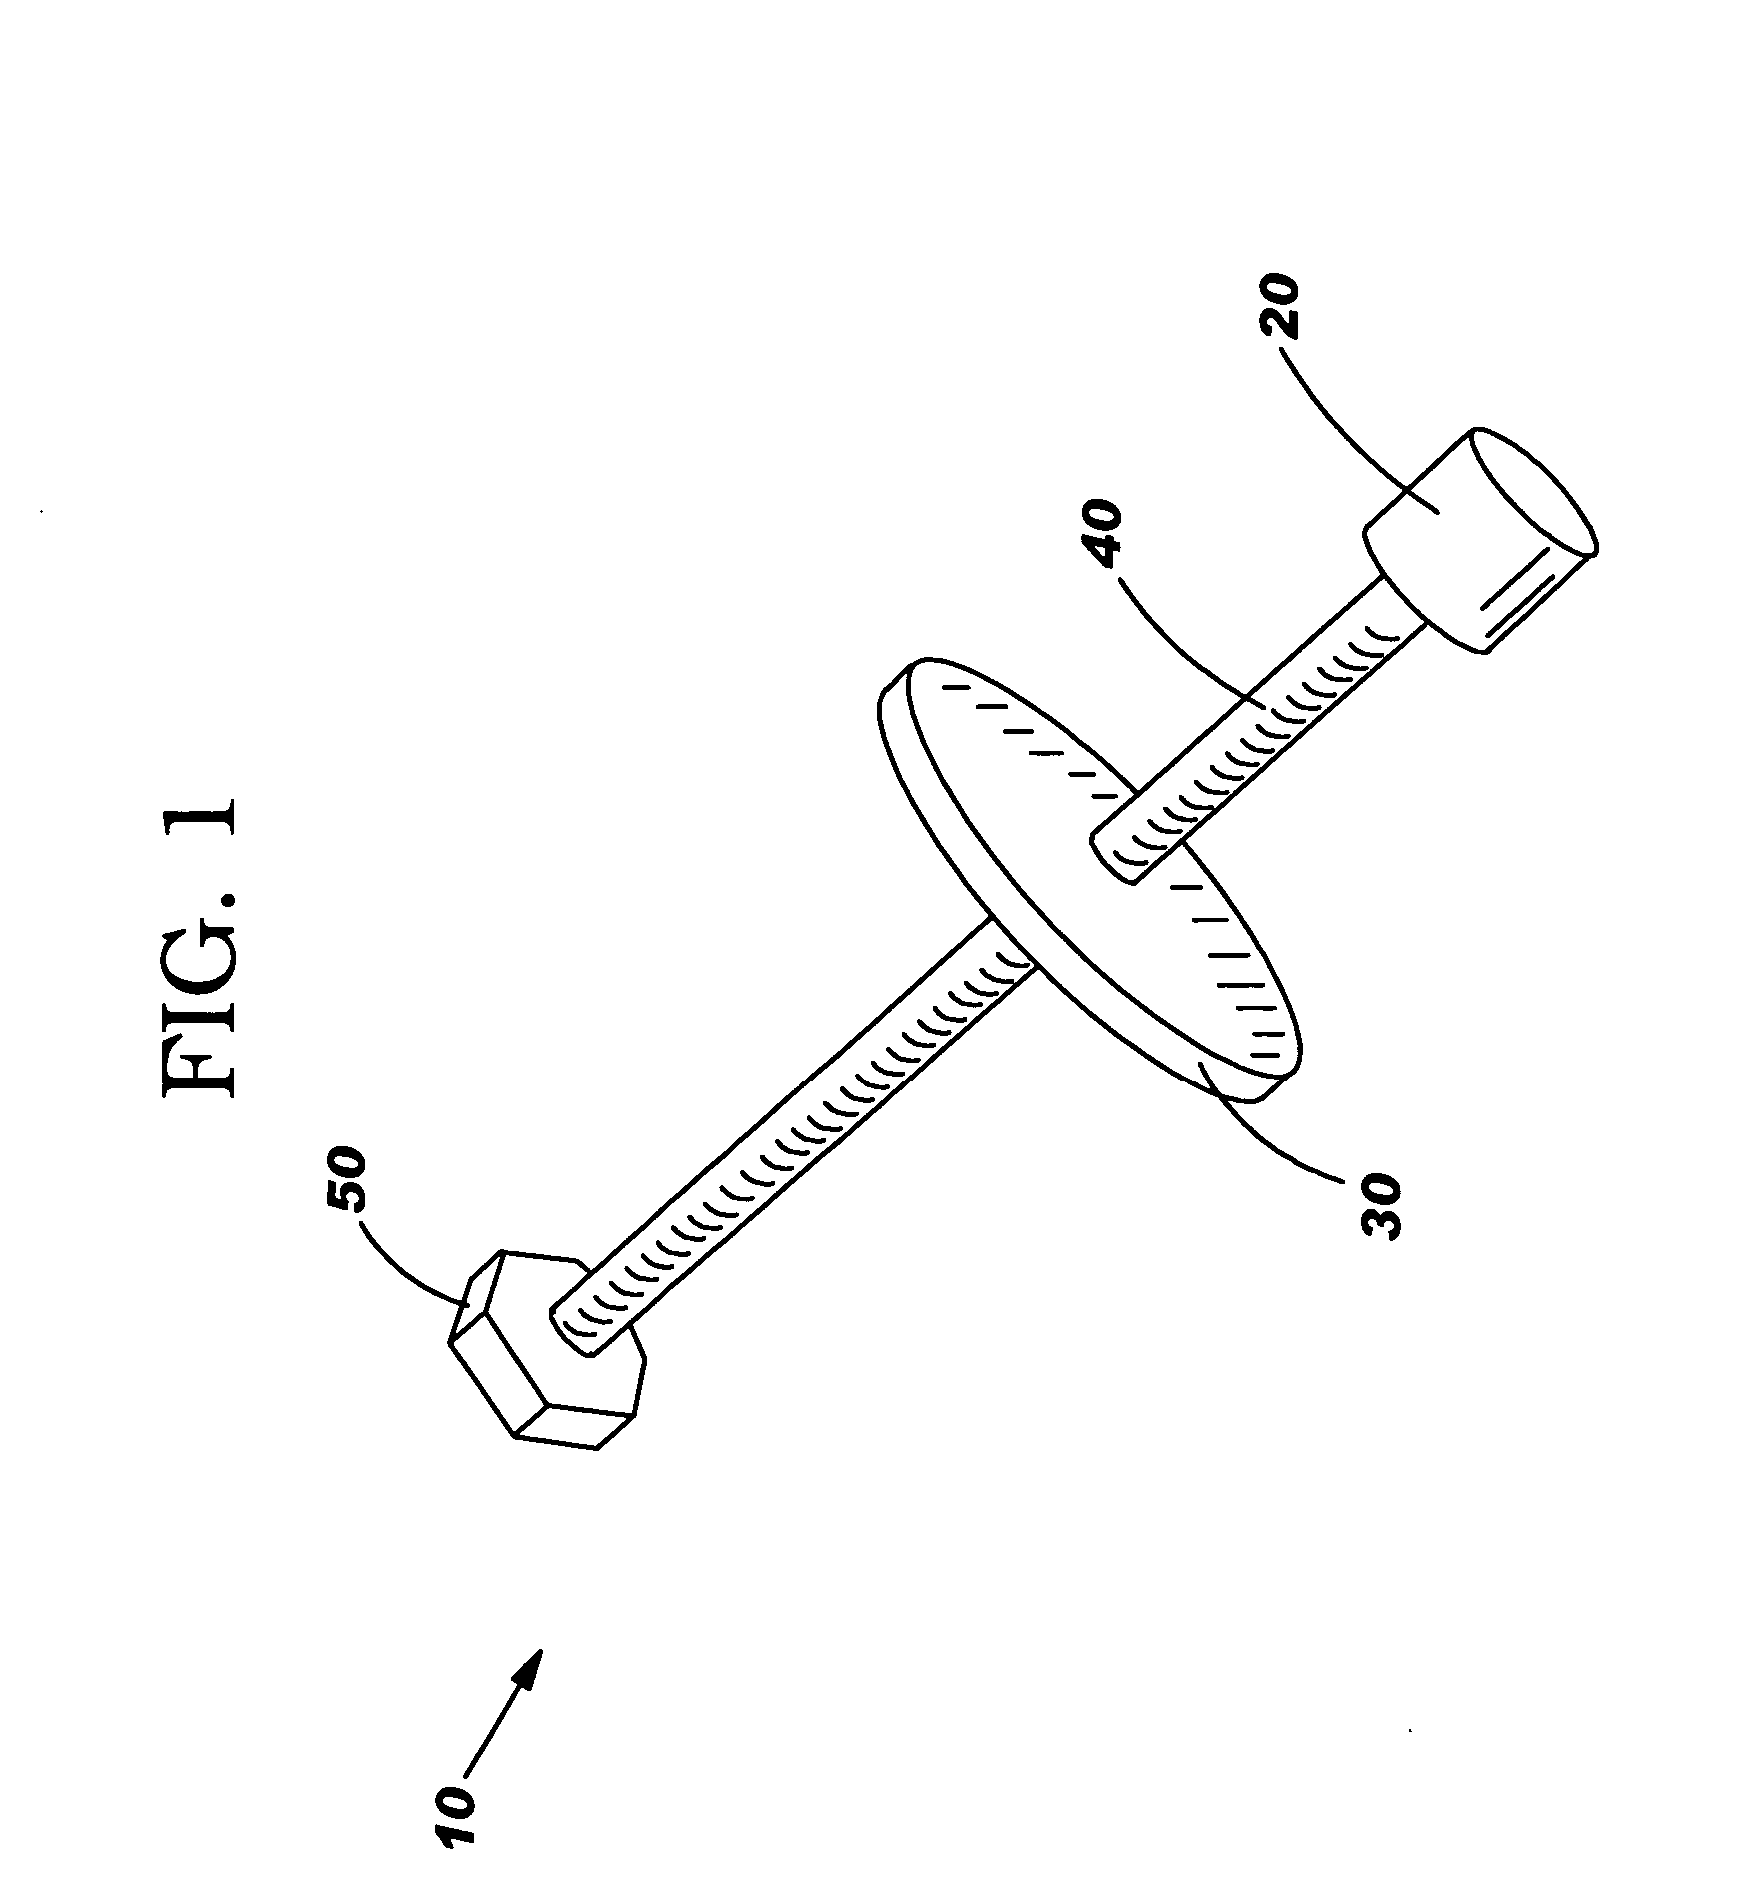 Essentially tubular body passage lengthening device and method